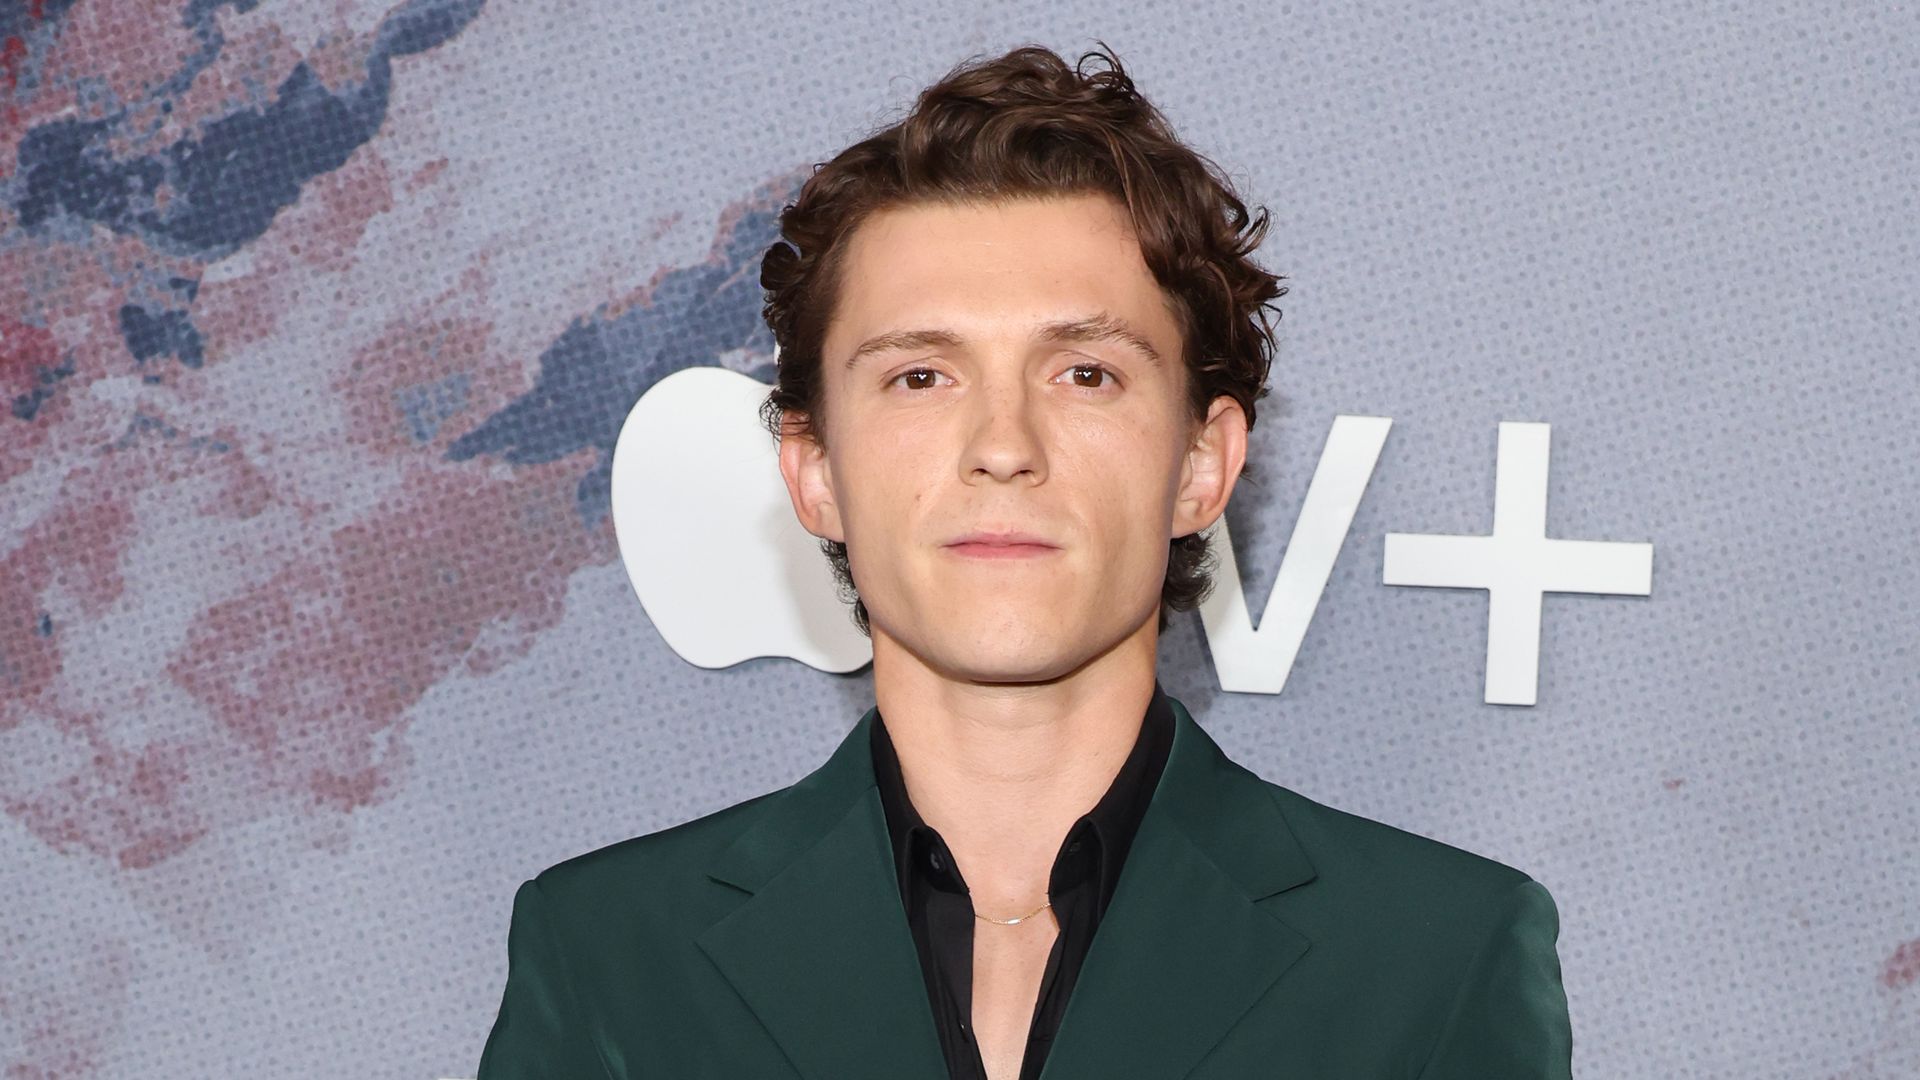 Tom Holland attends Apple TV+'s "The Crowded Room" New York Premiere at Museum of Modern Art on June 01, 2023 in New York City.